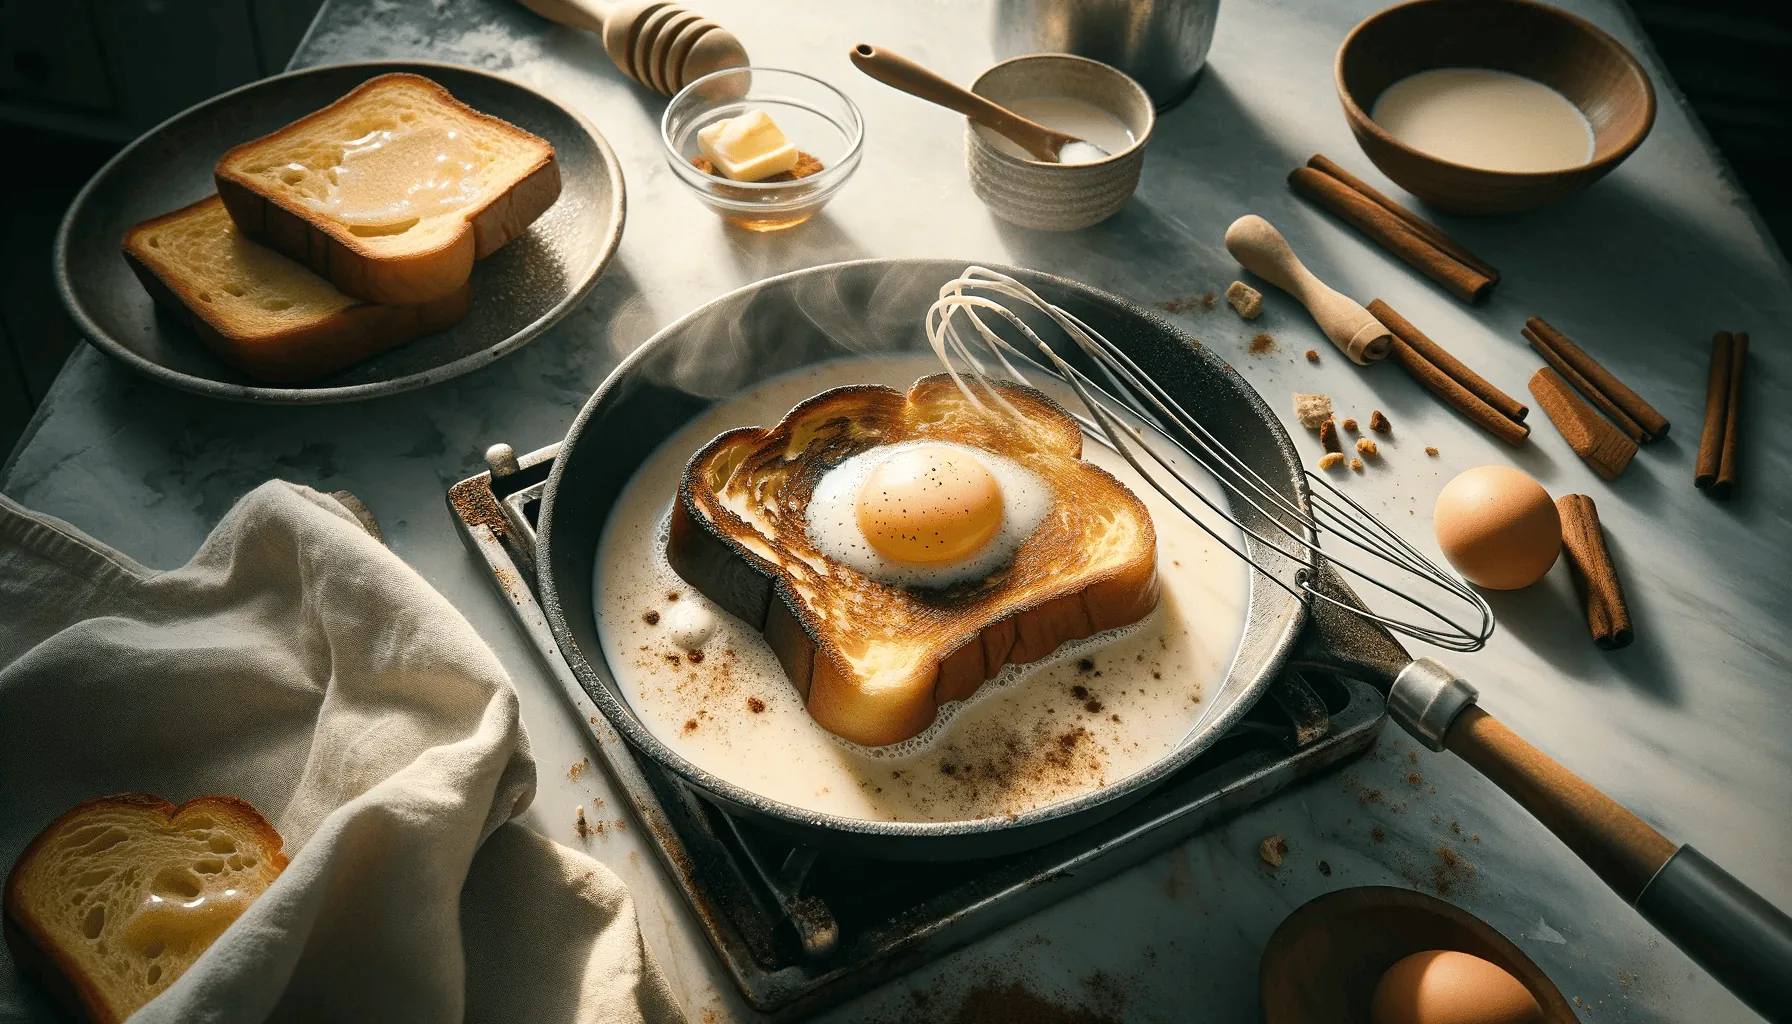 Eggnog French toast in preparation, featuring soaked brioche slices being cooked in a skillet on a marble countertop